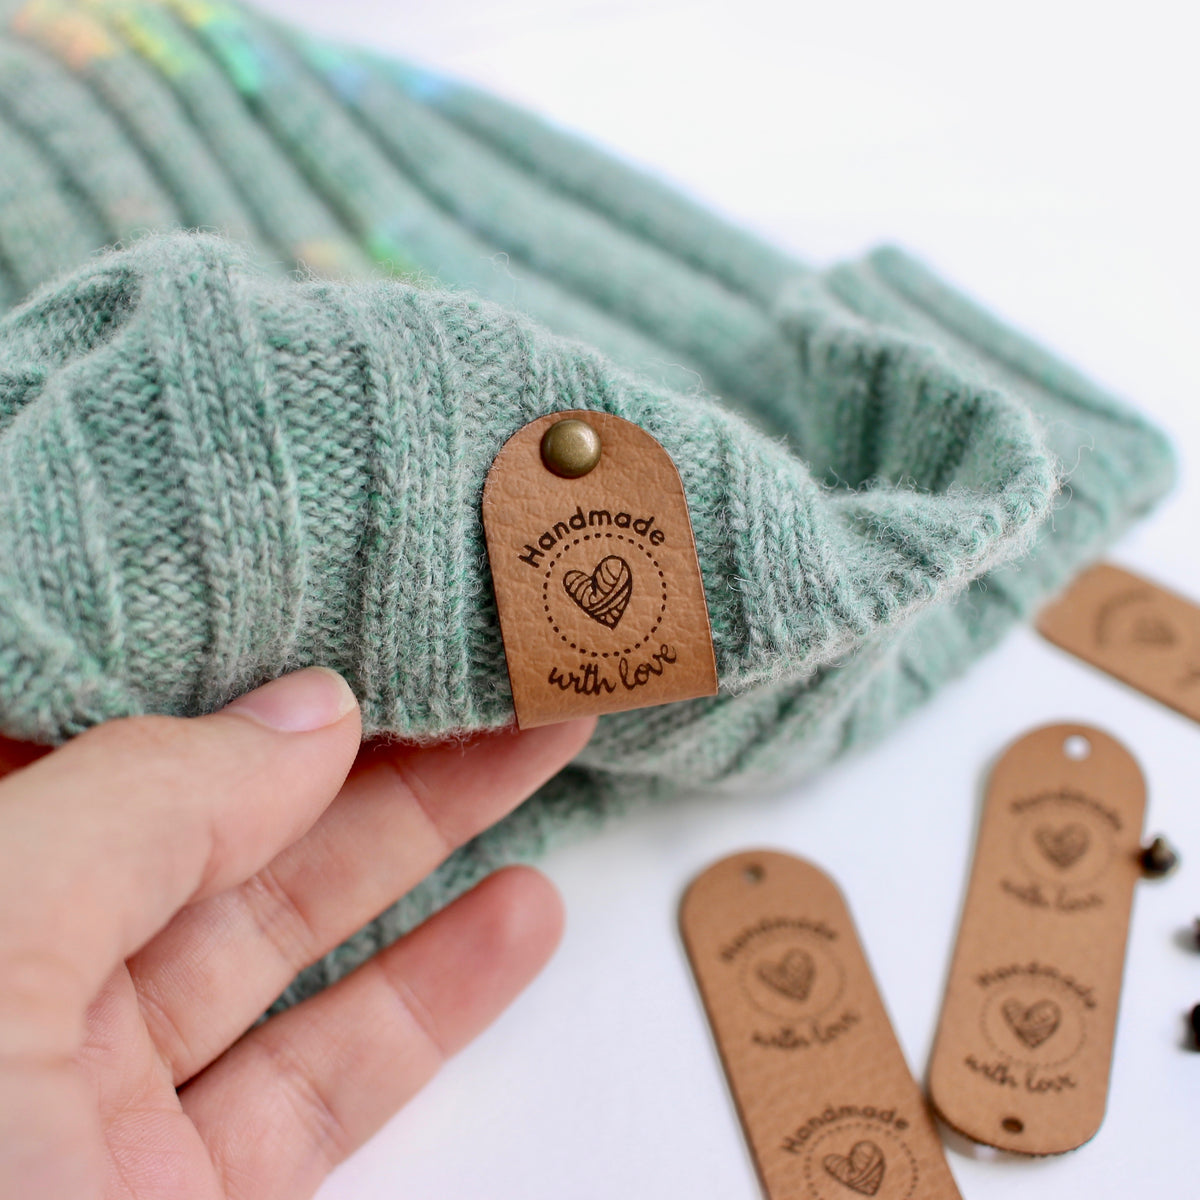 Handmade with love' tags for knits and crochet with rivets - 2.5x0.75